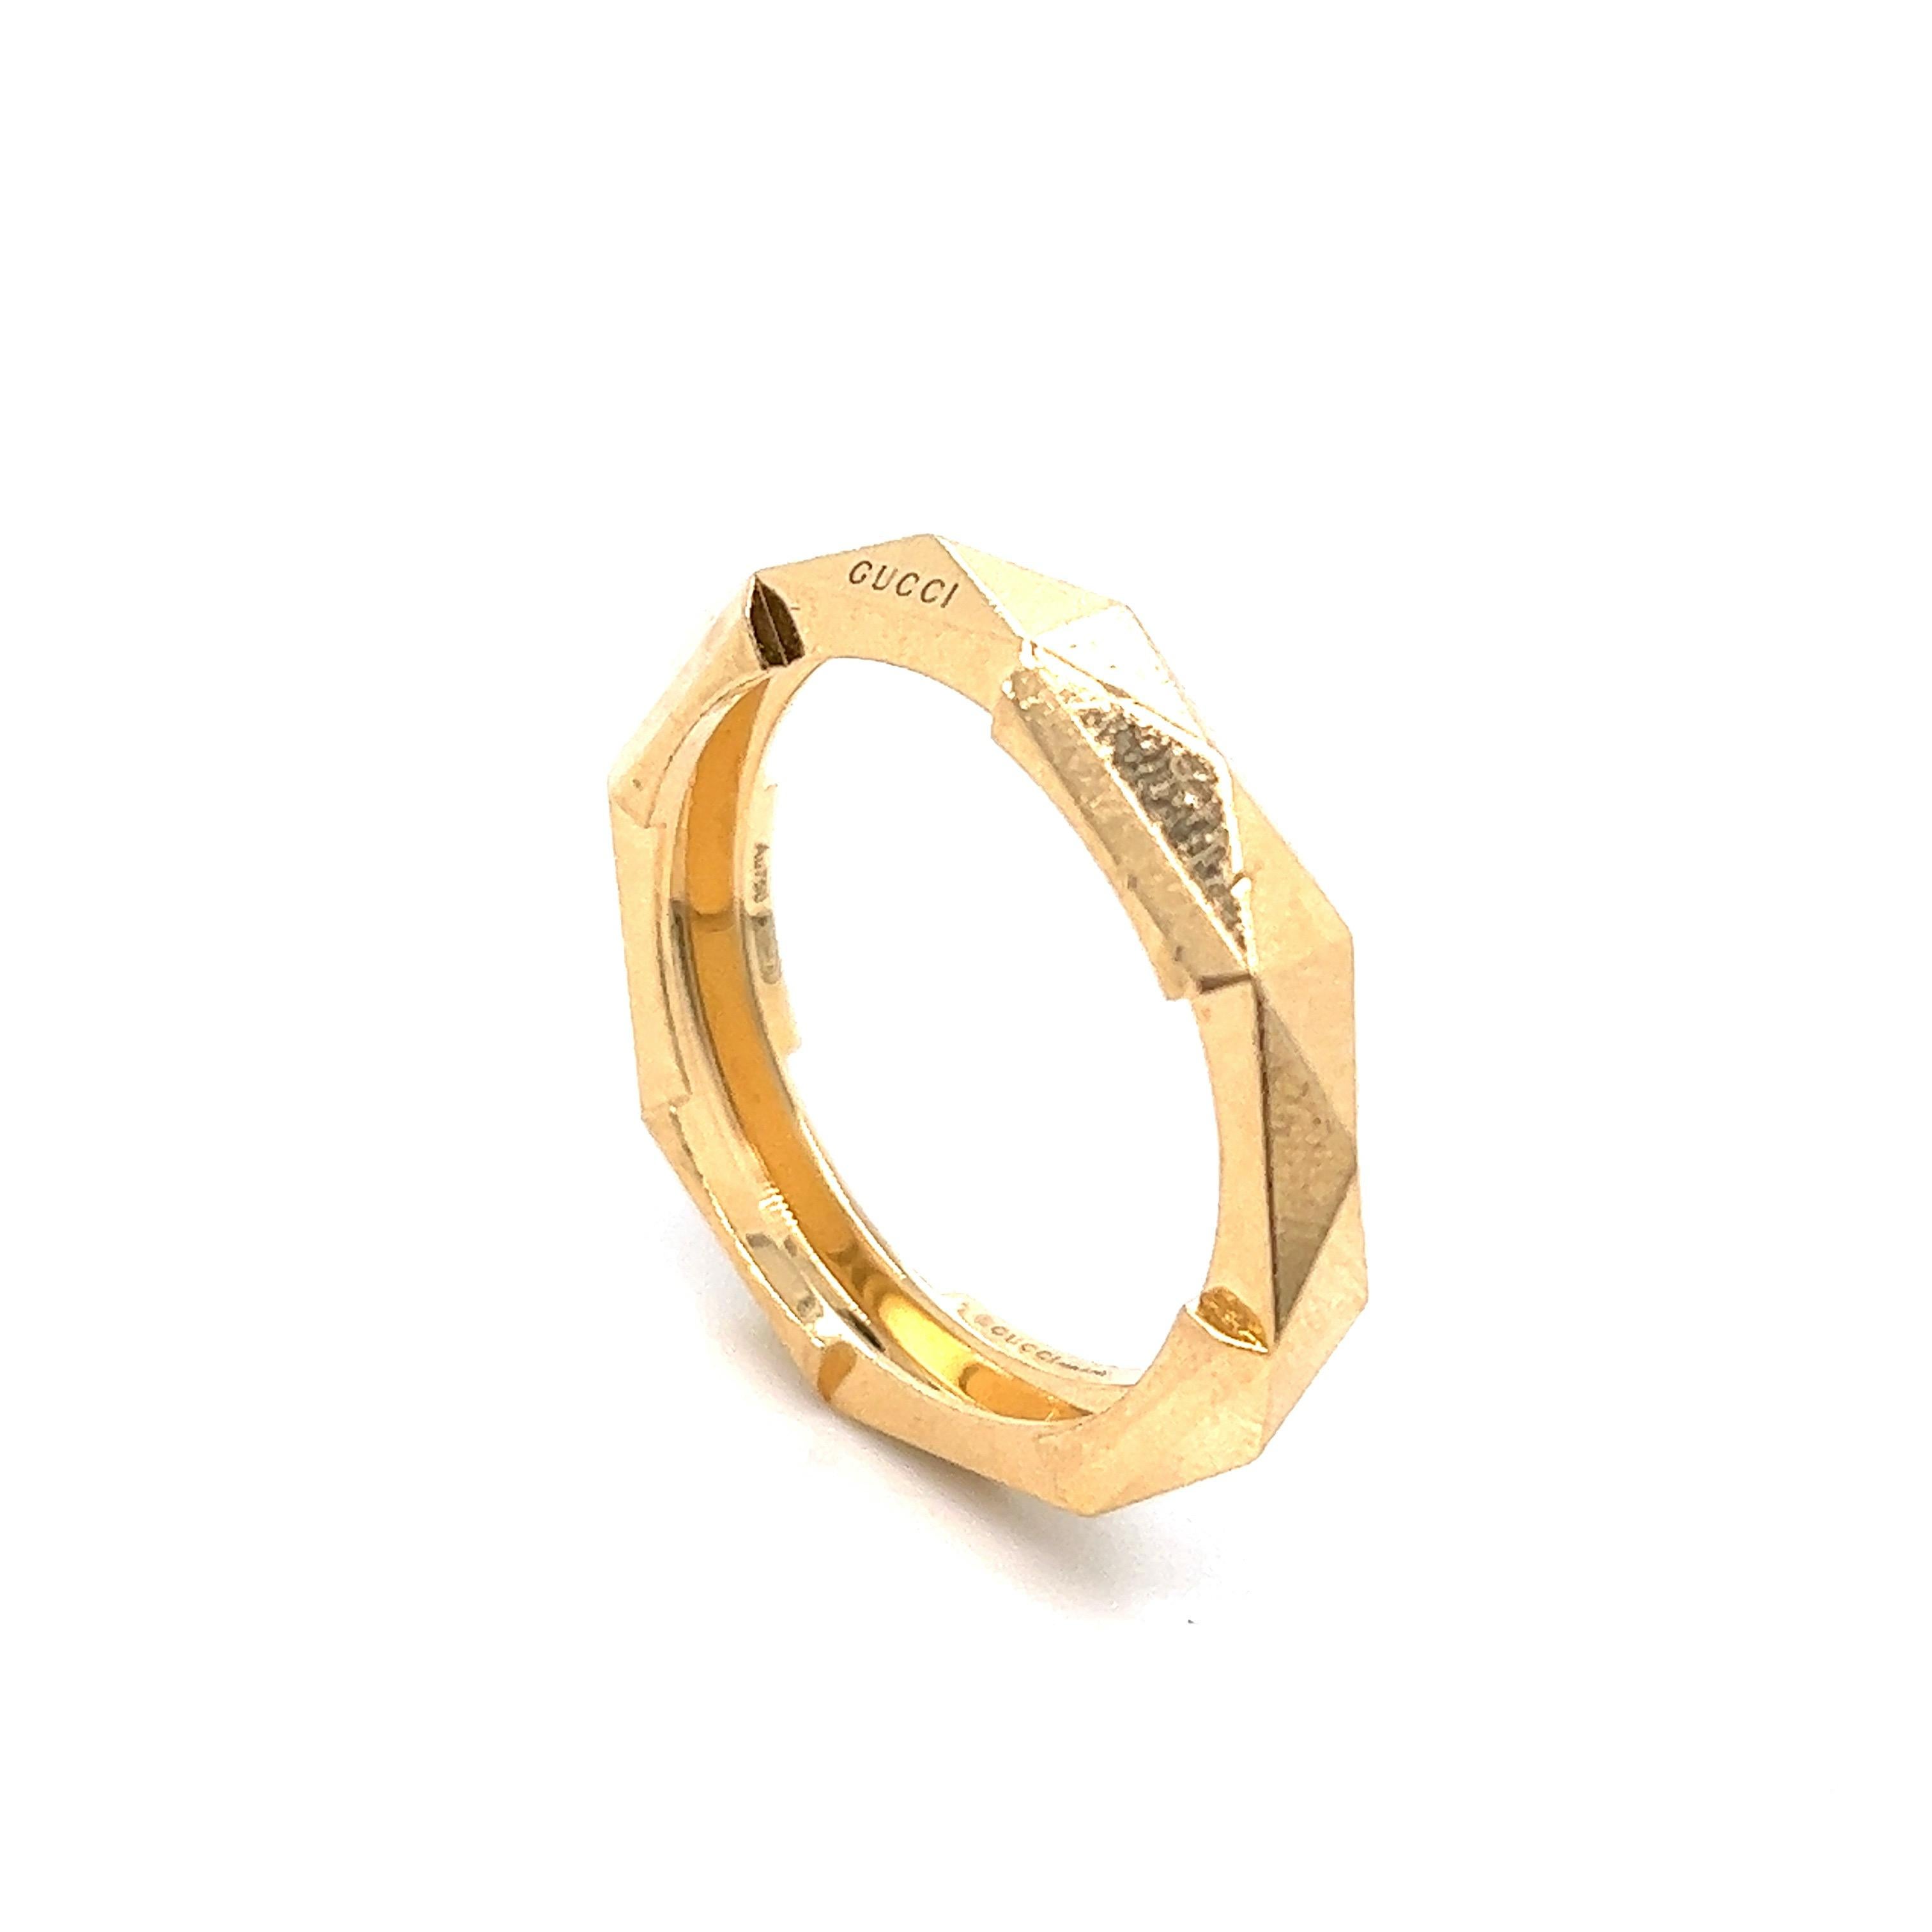 Gucci Link to Love men's ring

18 karat yellow gold in bolt motif; marked Gucci, Au750, 2294 AL

Size: 10.25-10.5
Total weight: 7.2 grams